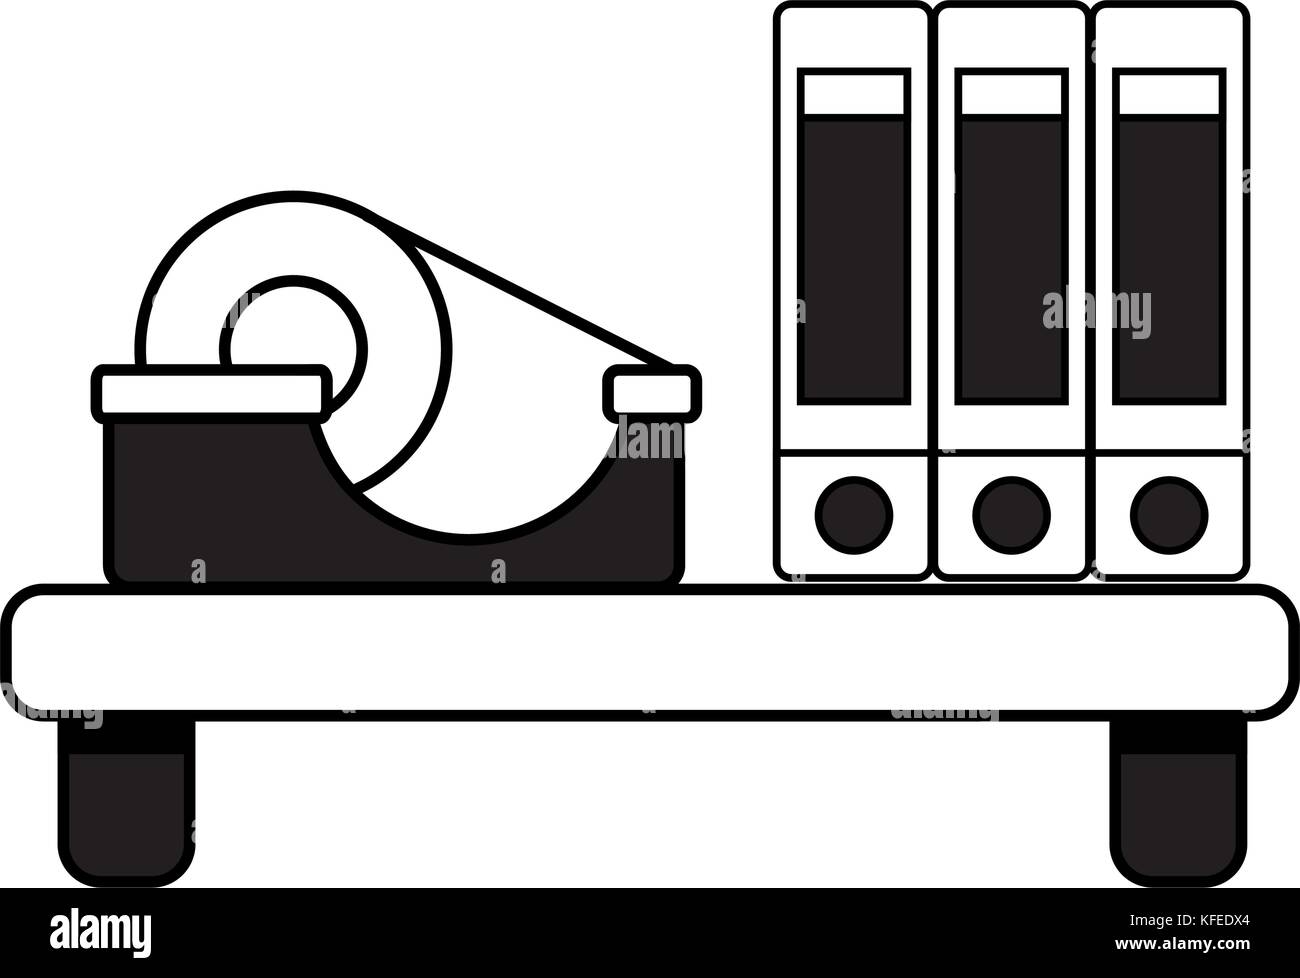 contour wood shelf with books and adhesive tape Stock Vector